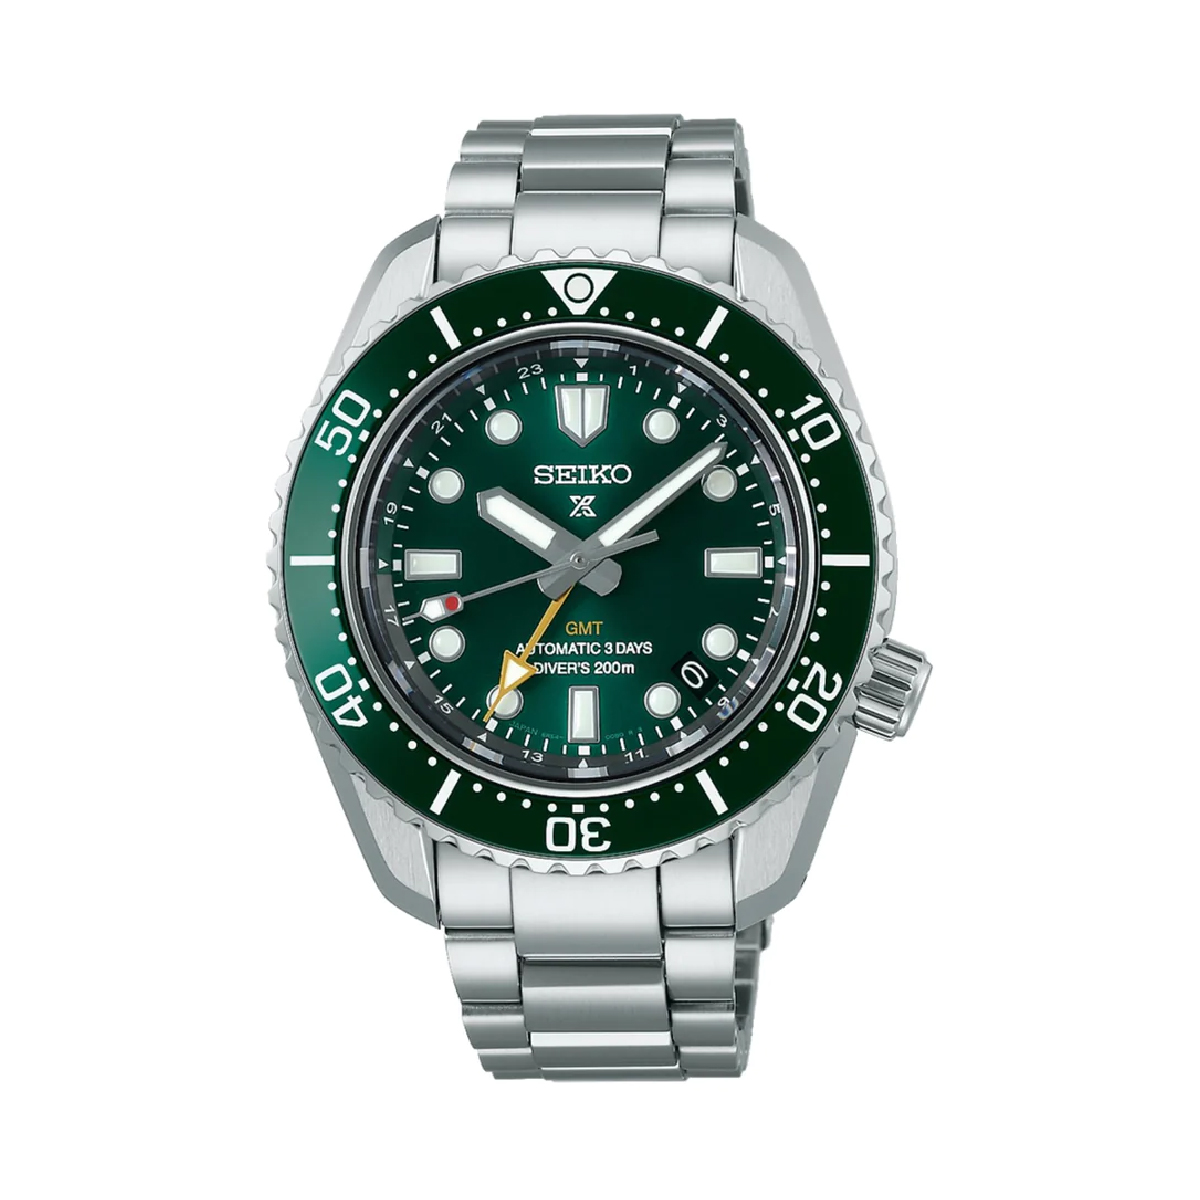 Stainless Steel Seiko Luxe Prospex Diver GMT